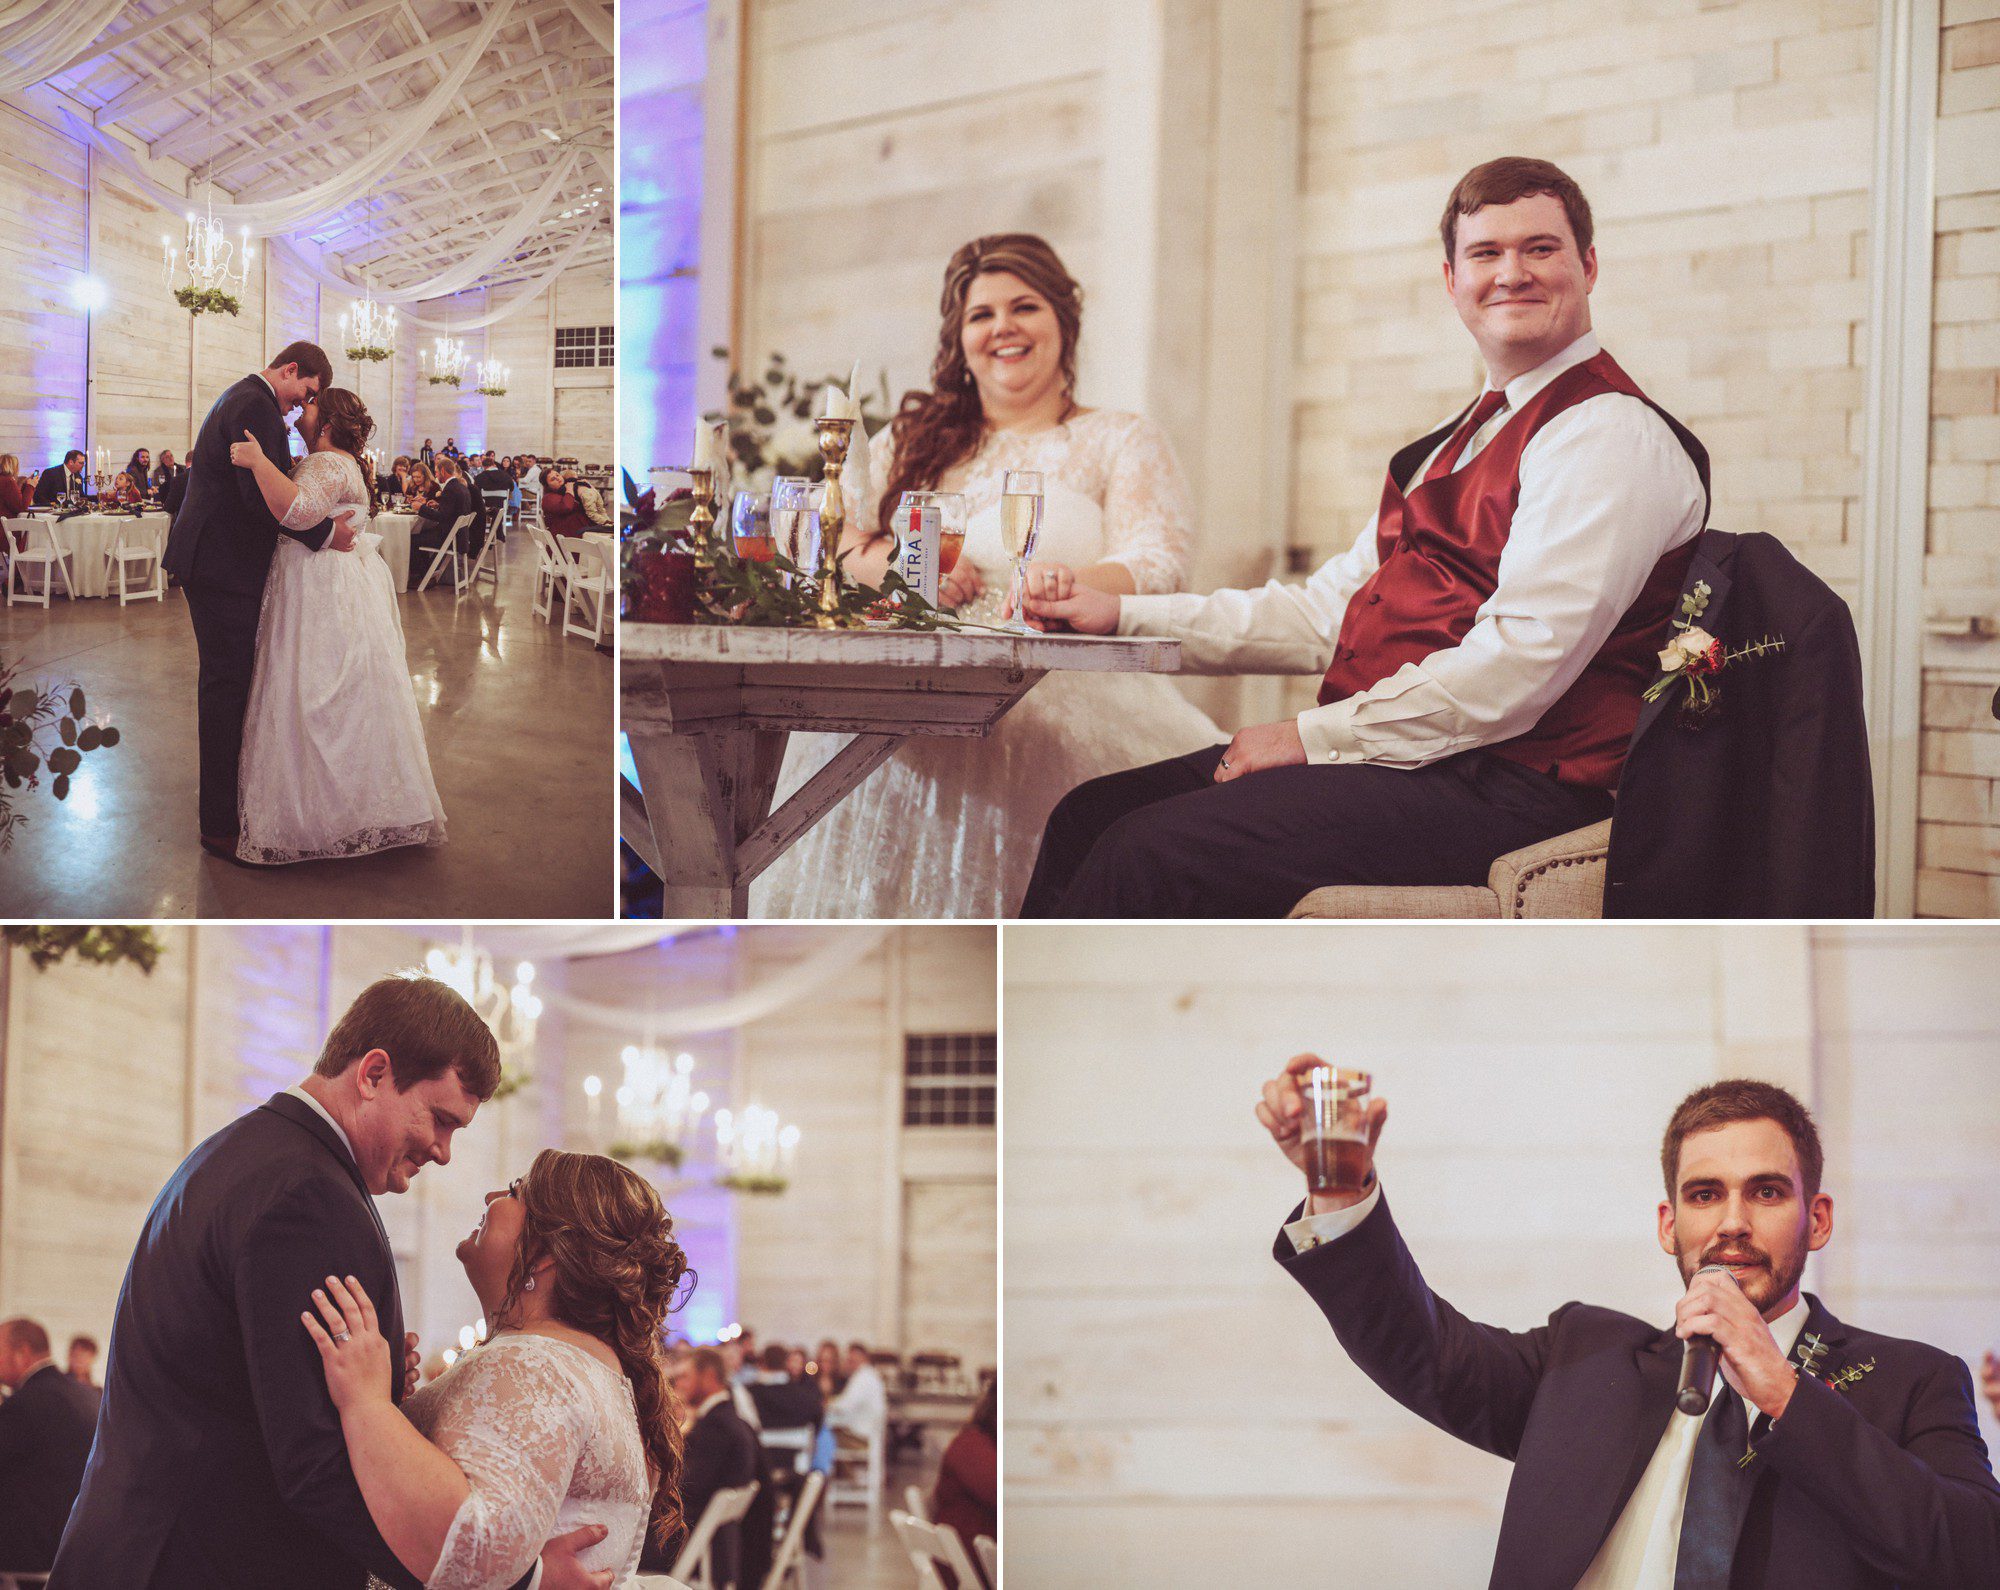 Toasts and first dances at White Dove Barn indoor wedding reception 